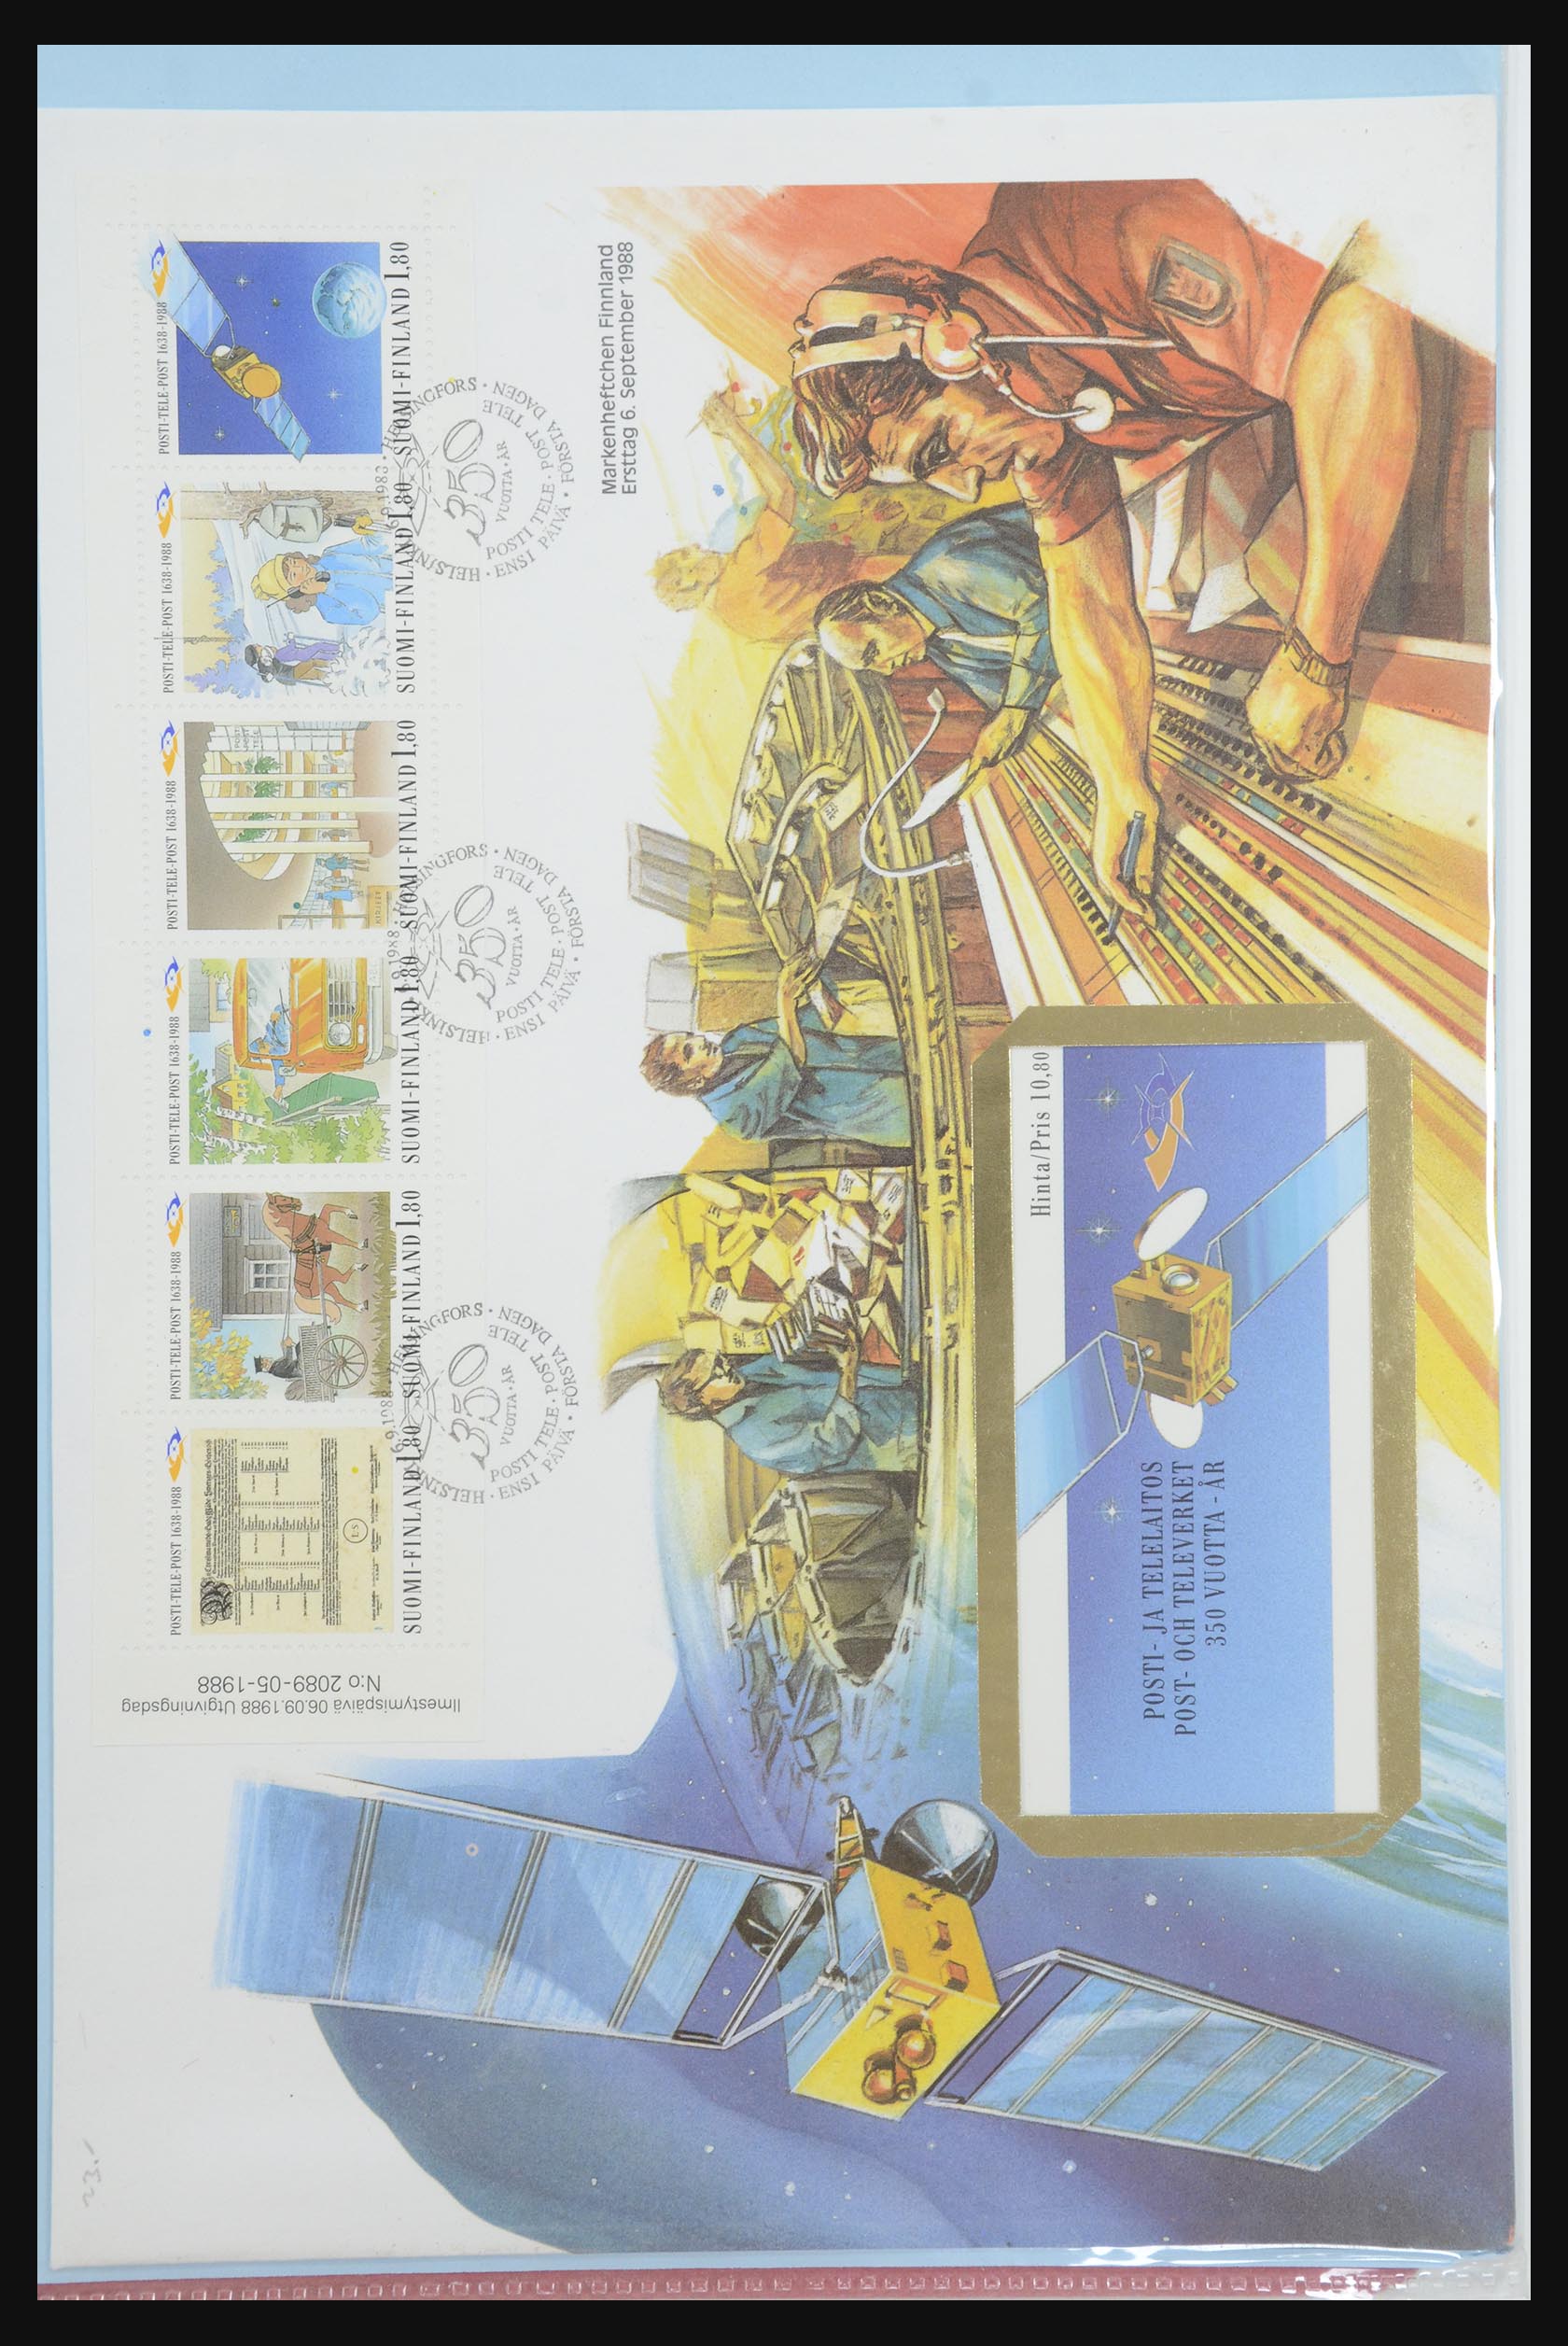 31915 435 - 31915 Western Europe souvenir sheets and stamp booklets on FDC.